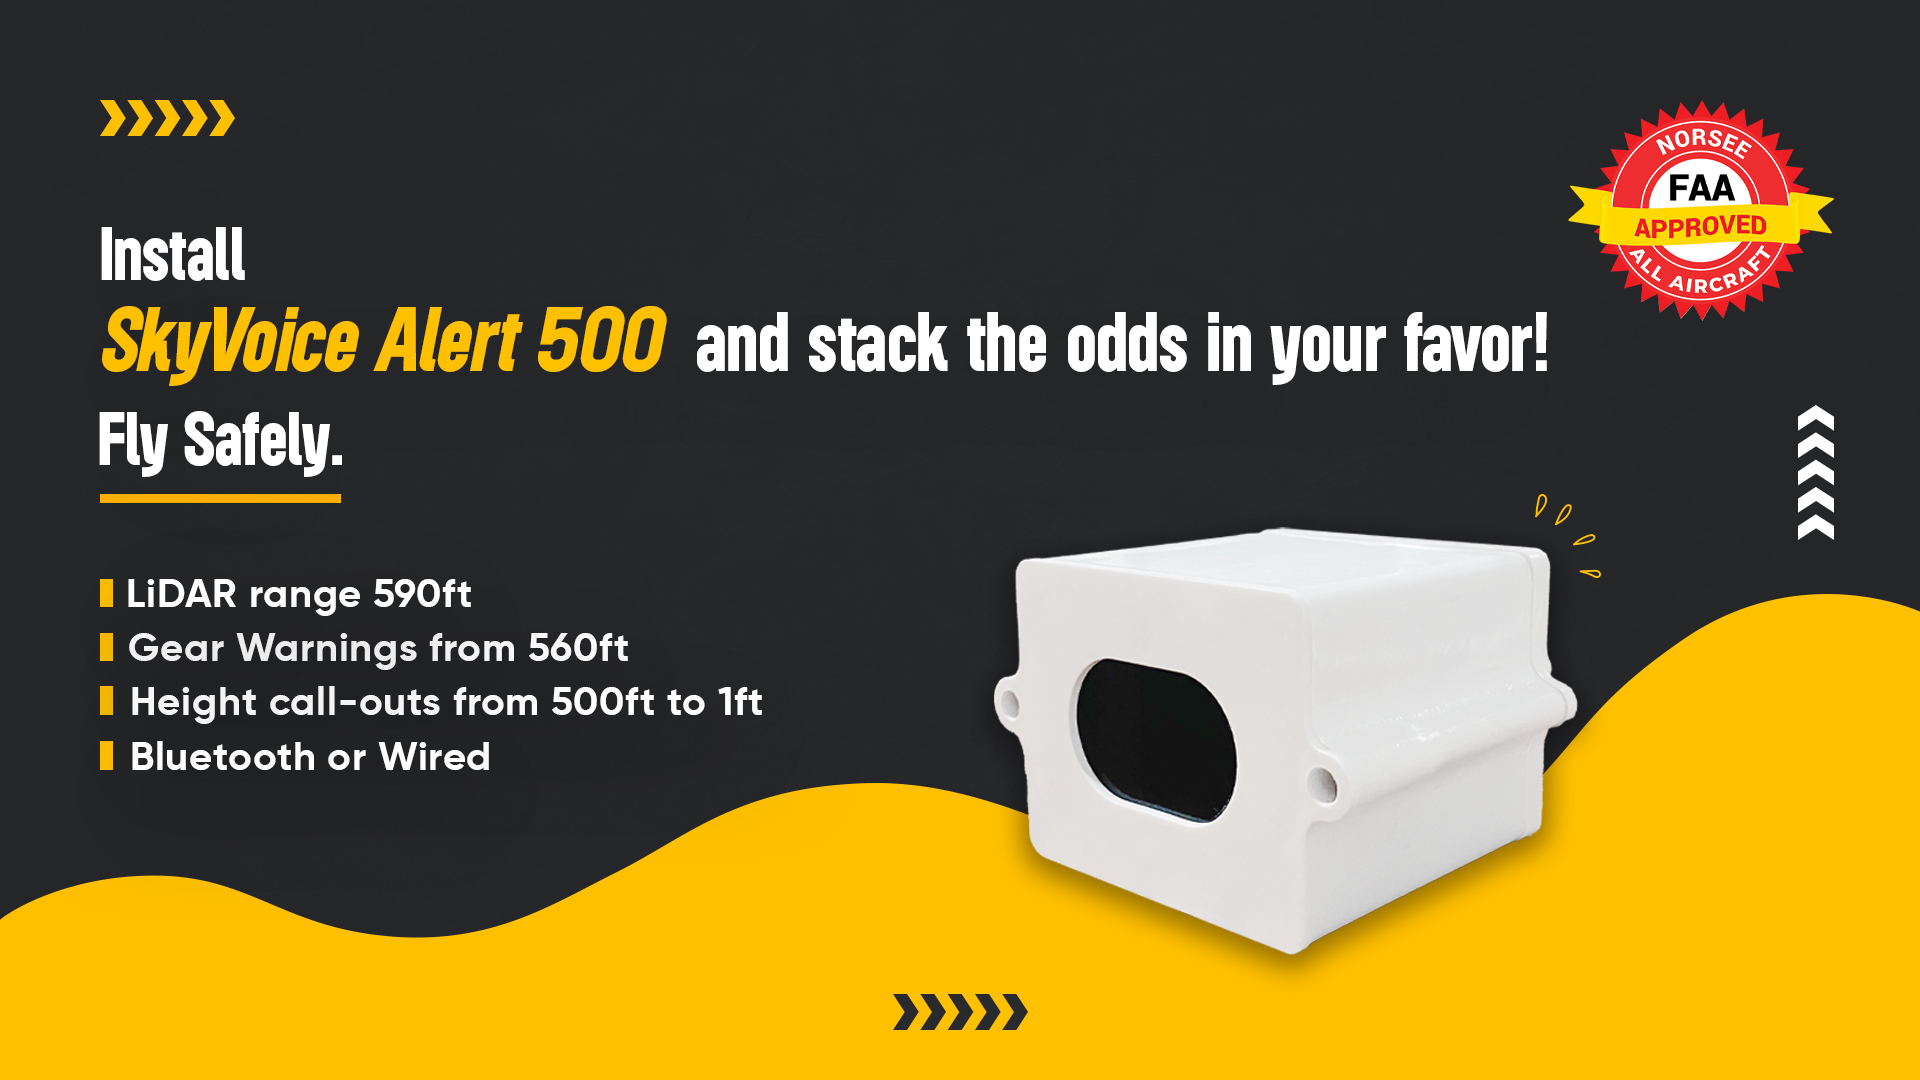 Install SkyVoice Alert 500 and stack the odds in your favor! Fly safely